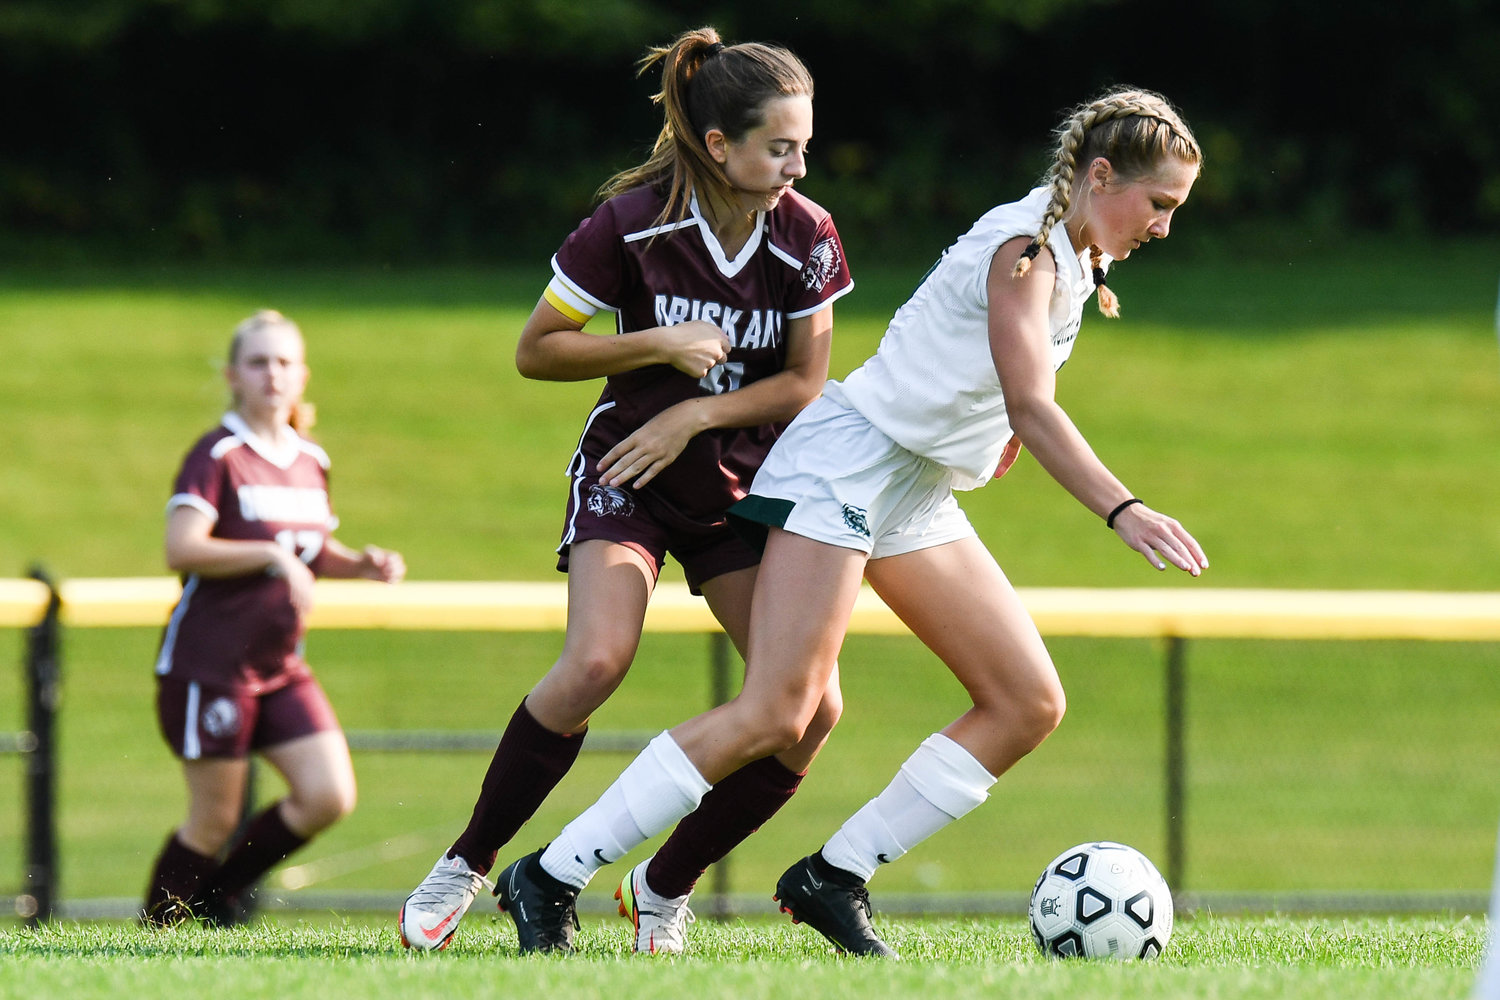 Rachel Daskiewich of Oriskany defends Westmoreland's Victoria Downs during the game on Friday at Bernie Block Field in Oriskany. The Bulldogs won 3-0 on the road.